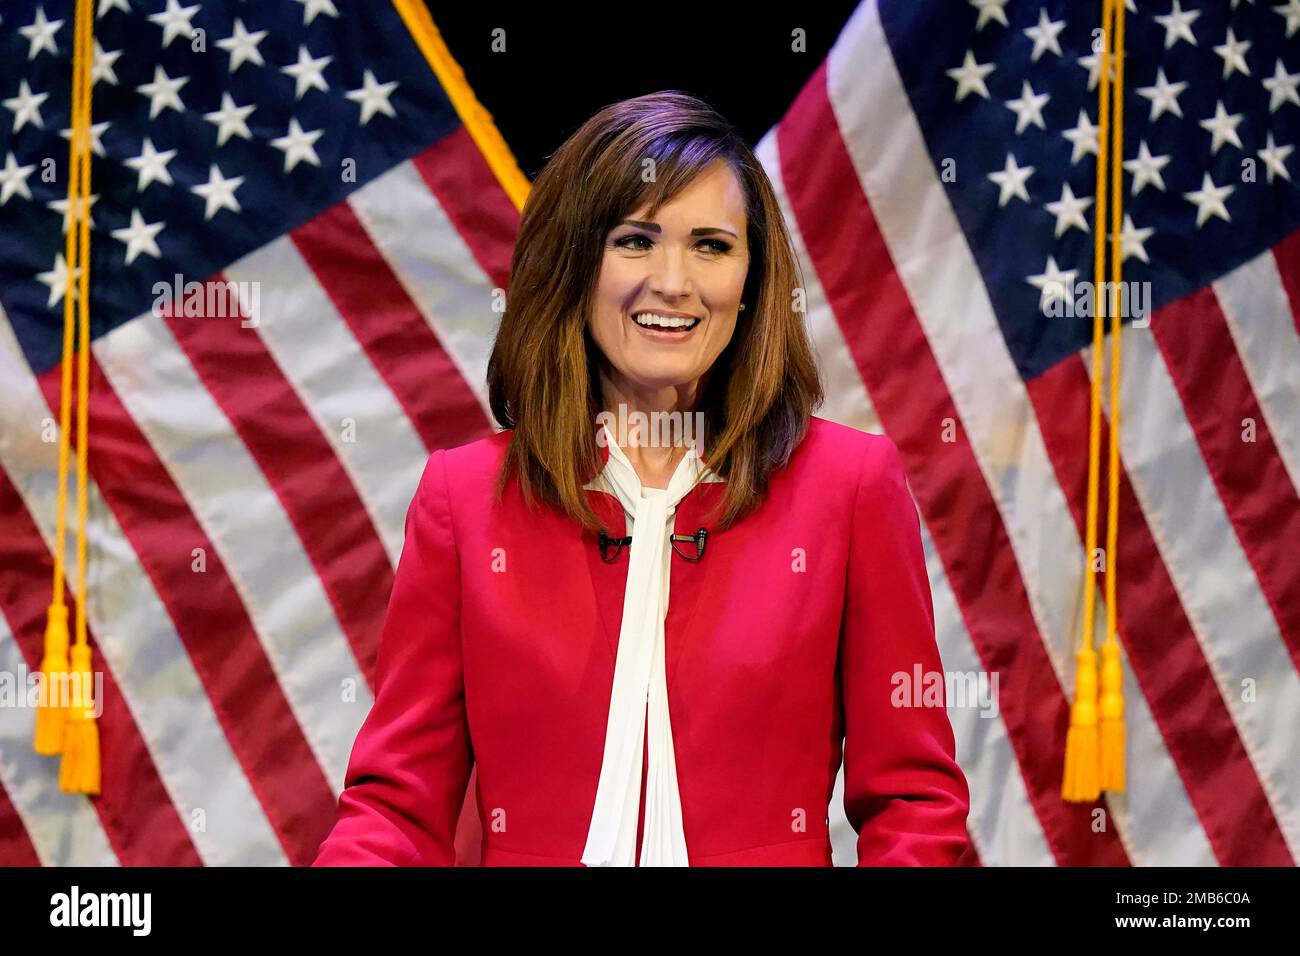 FILE - Political staffer and Utah . Senate candidate Ally Isom speaks  during a Republican primary debate on June 1, 2022, in Draper, Utah. Isom  faces Sen. Mike Lee and former state